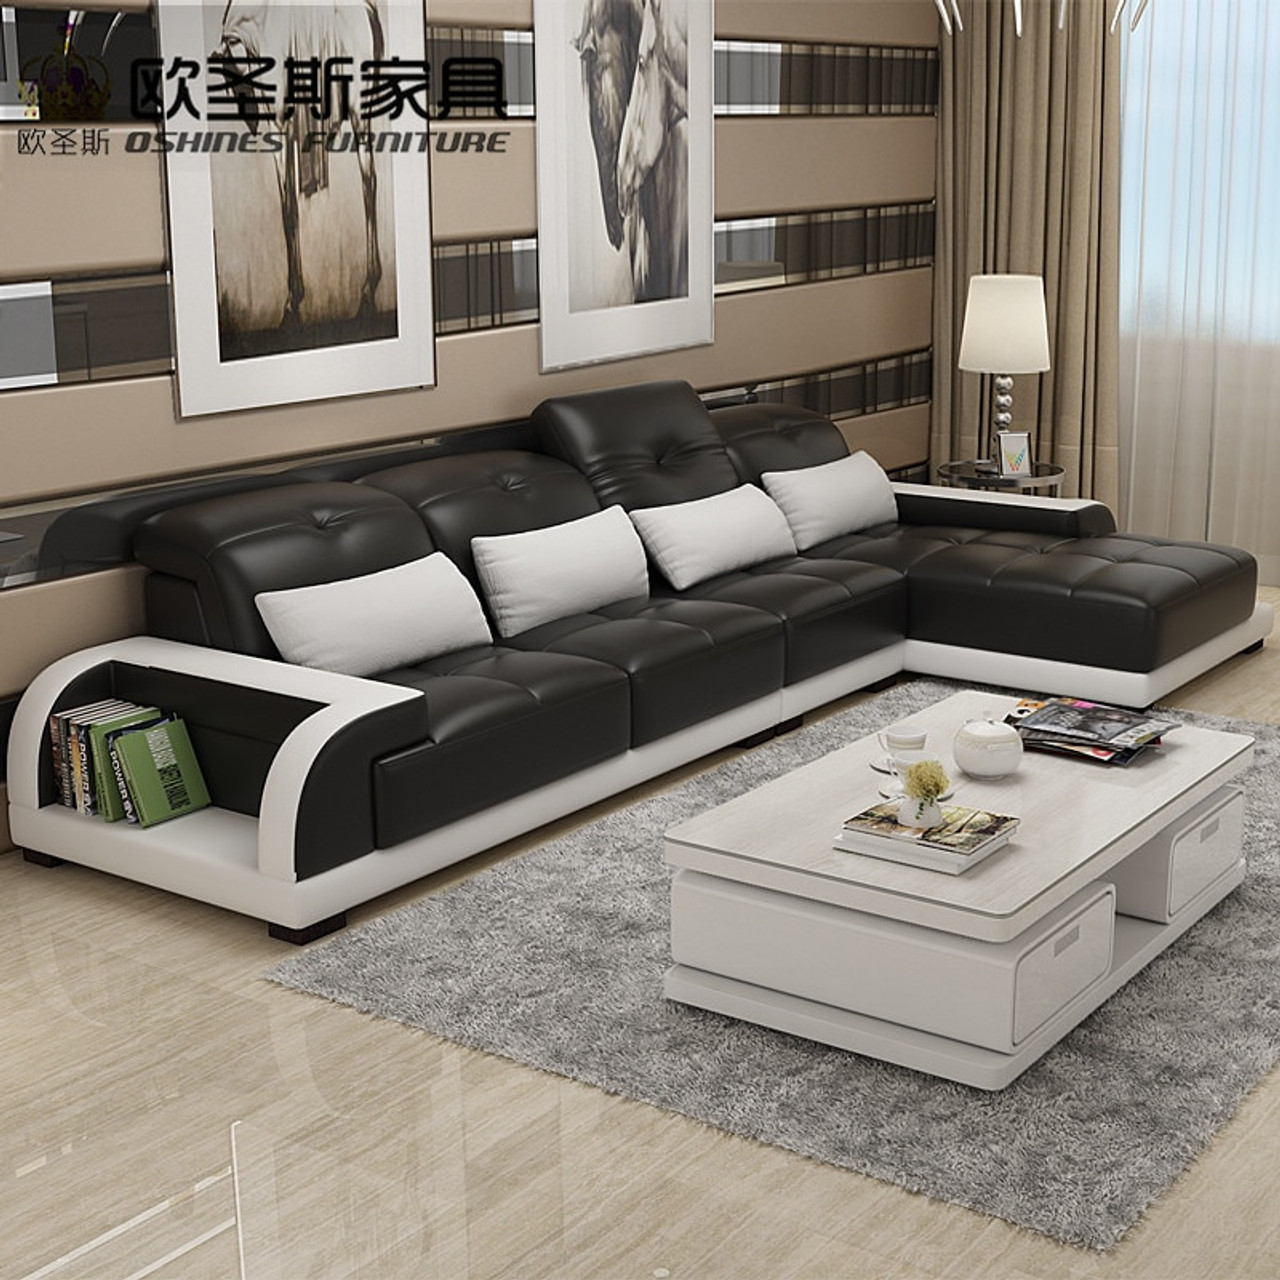 Cheers Barcelona Black And Big White Stitching L Shaped Modern Design Sectional Soft Cow Leather Sofa Set Living Room Furniture OnshopDealsCom